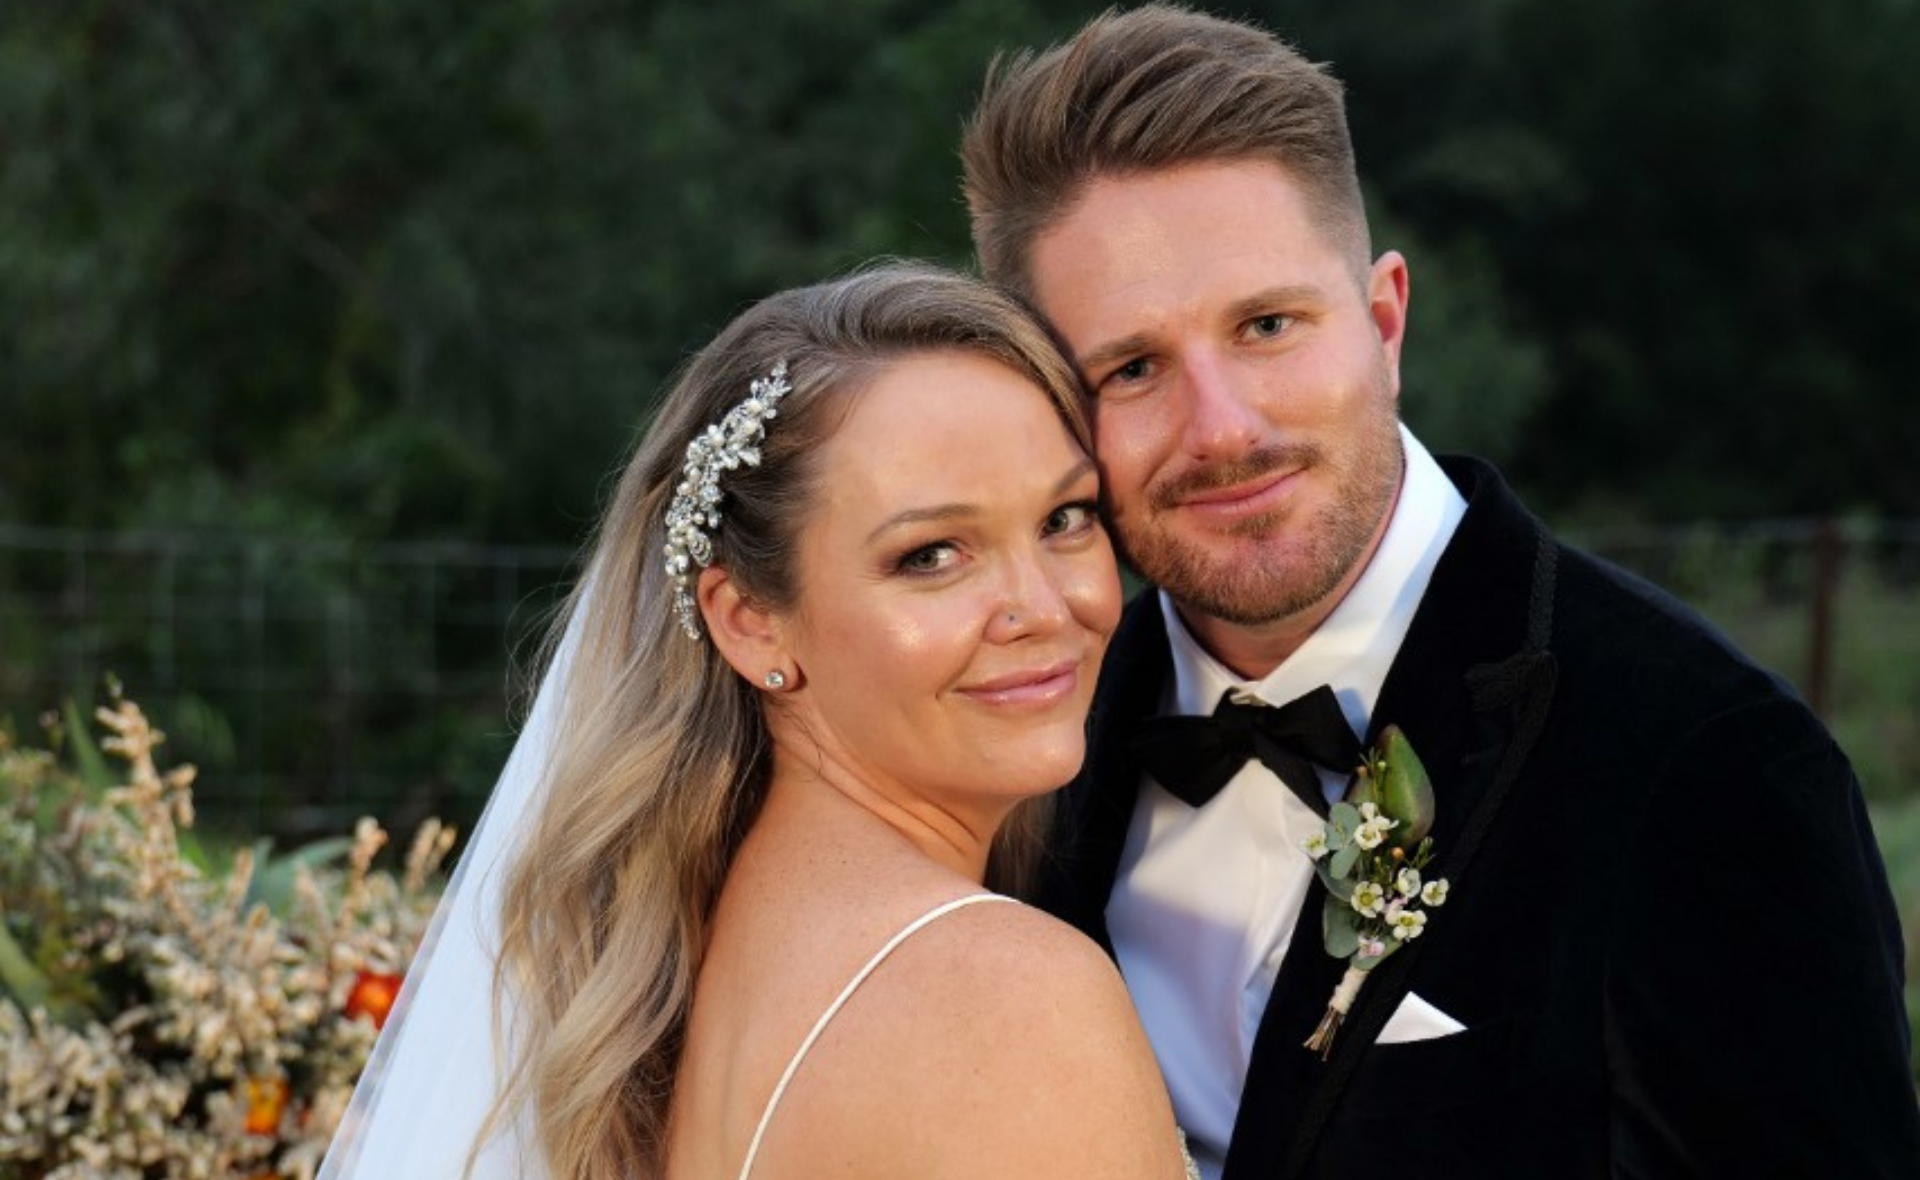 EXCLUSIVE: MAFS’ Bryce and Melissa reveal their wedding and baby plans